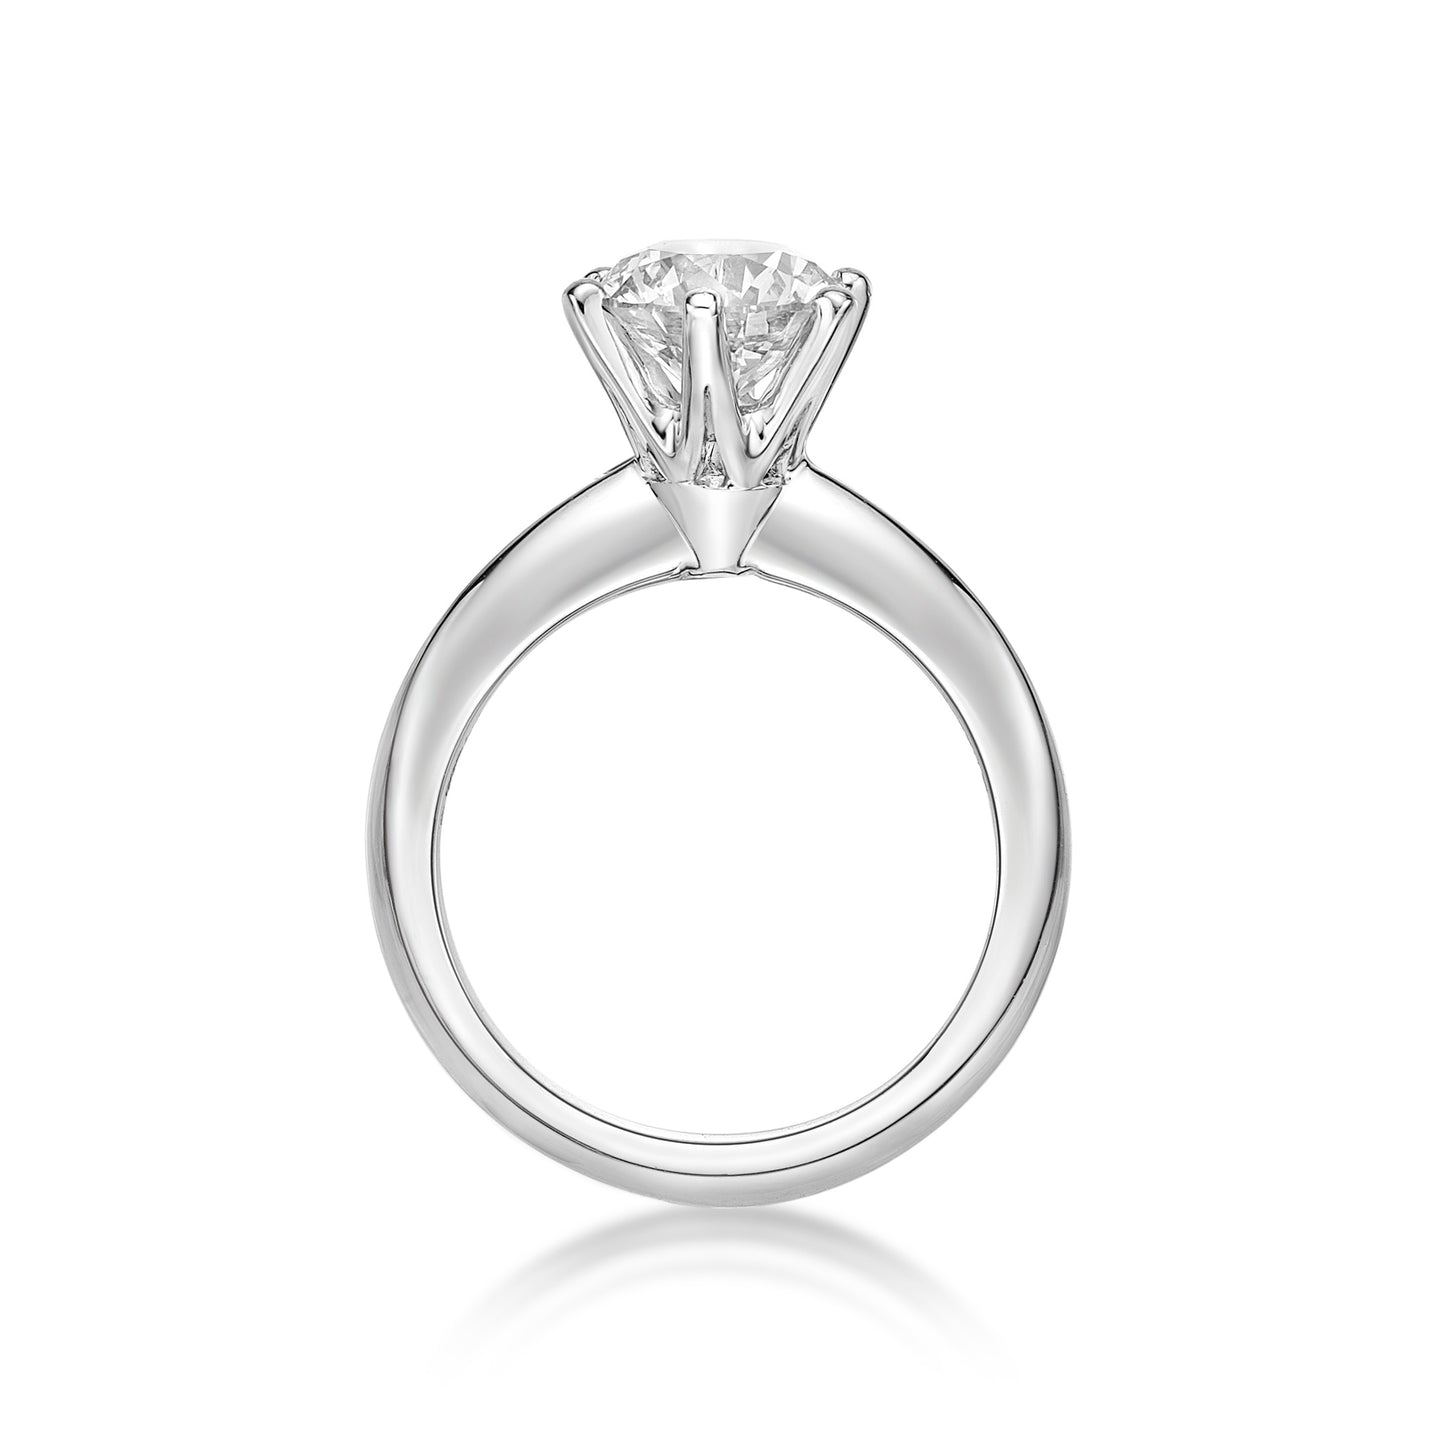 2.01ct Round Brilliant diamond in a classic Platinum six-claw Crown Solitaire setting with knife edge band